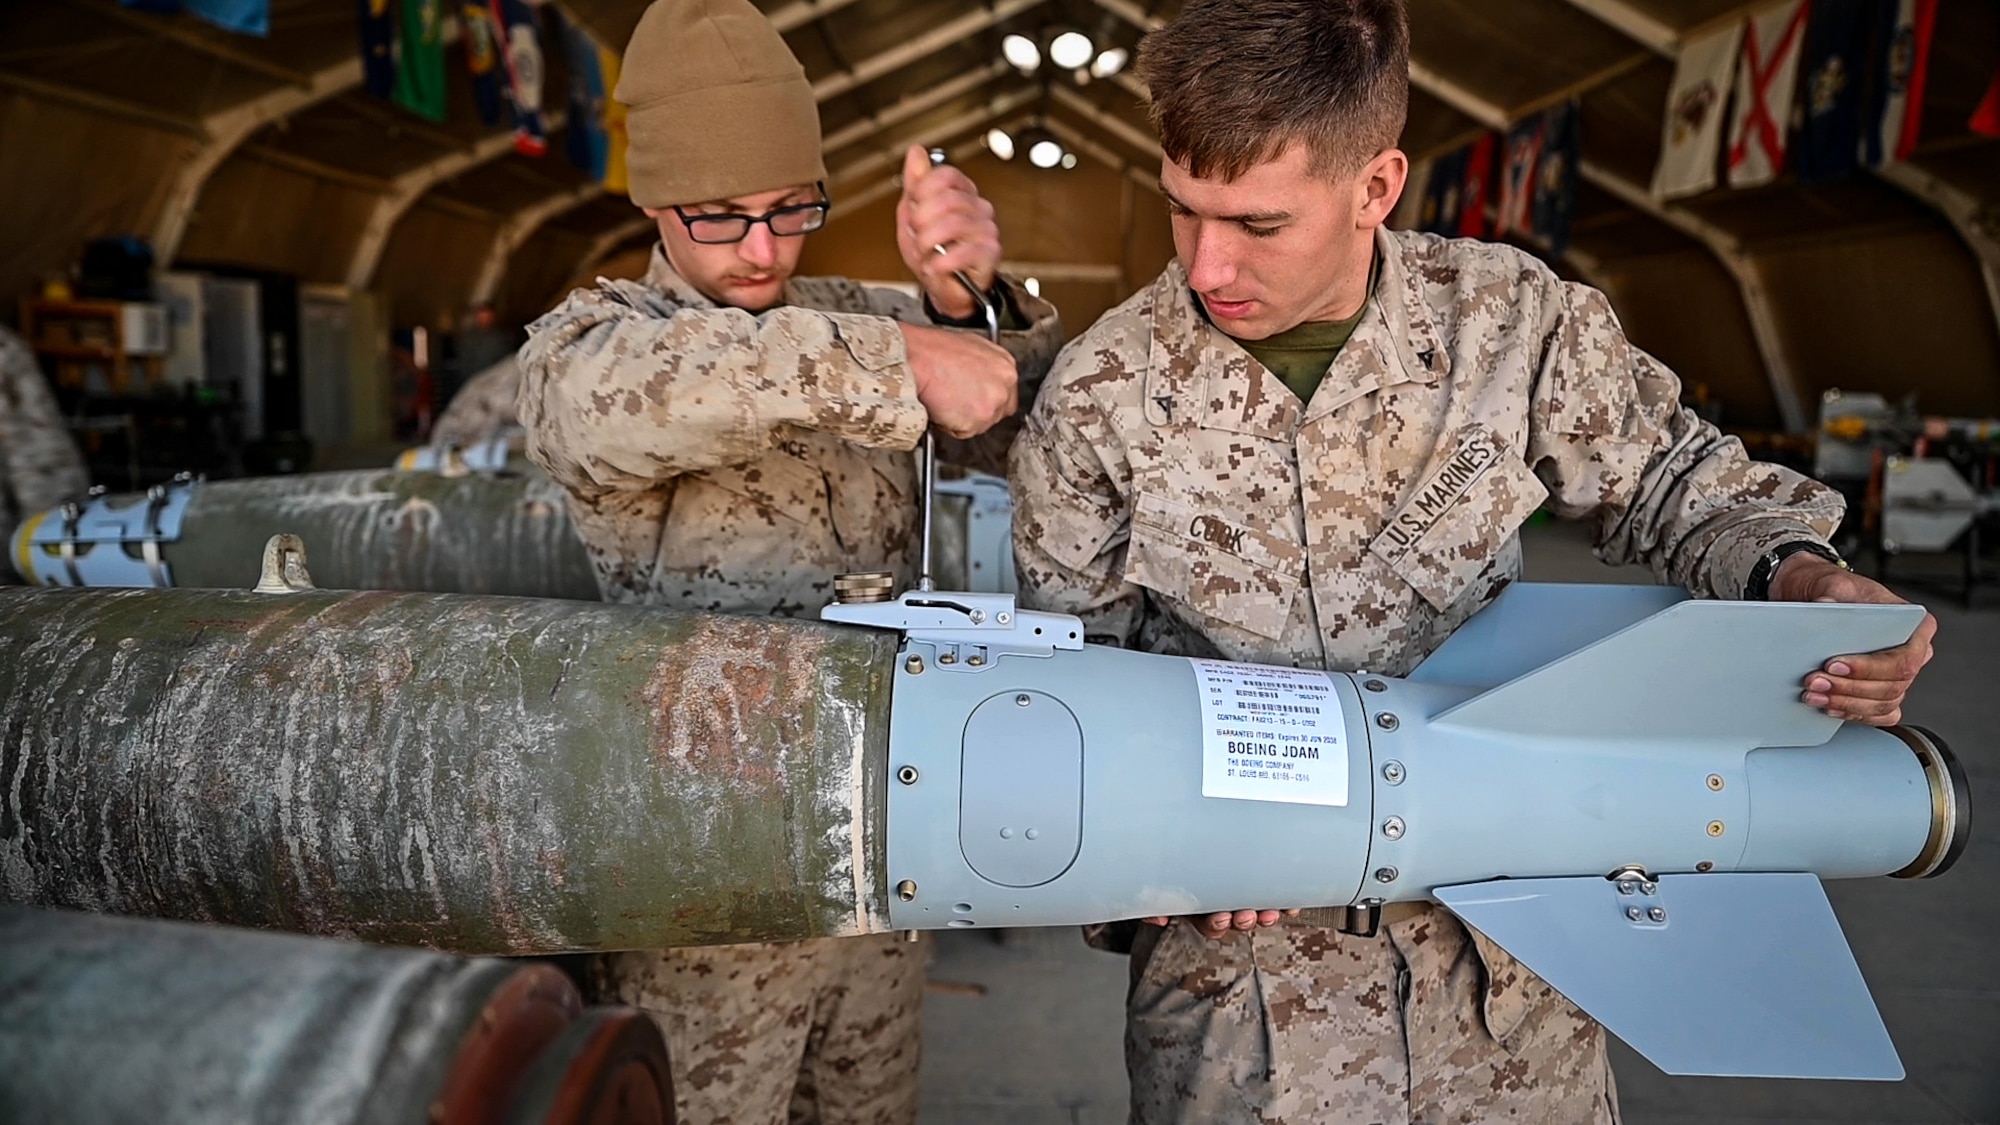 Marine Fighter Attack Squadron 115 aviation ordnance technicians prepare a U. S. Air Force Guided Bomb Unit 38 for employment on a U.S. Marine Corps F/A-18 Hornet proof of concept mission at an undisclosed location in Southwest Asia, March 14, 2022. VMFA-115 integrated with the 332d Air Expeditionary Wing to further interoperability between the two services by validating ordnance compatibilities between U.S. Air Force and U.S. Marine Corps assets during Operation Agile Spartan II. (U.S. Air Force Photo by Master Sgt. Christopher Parr)